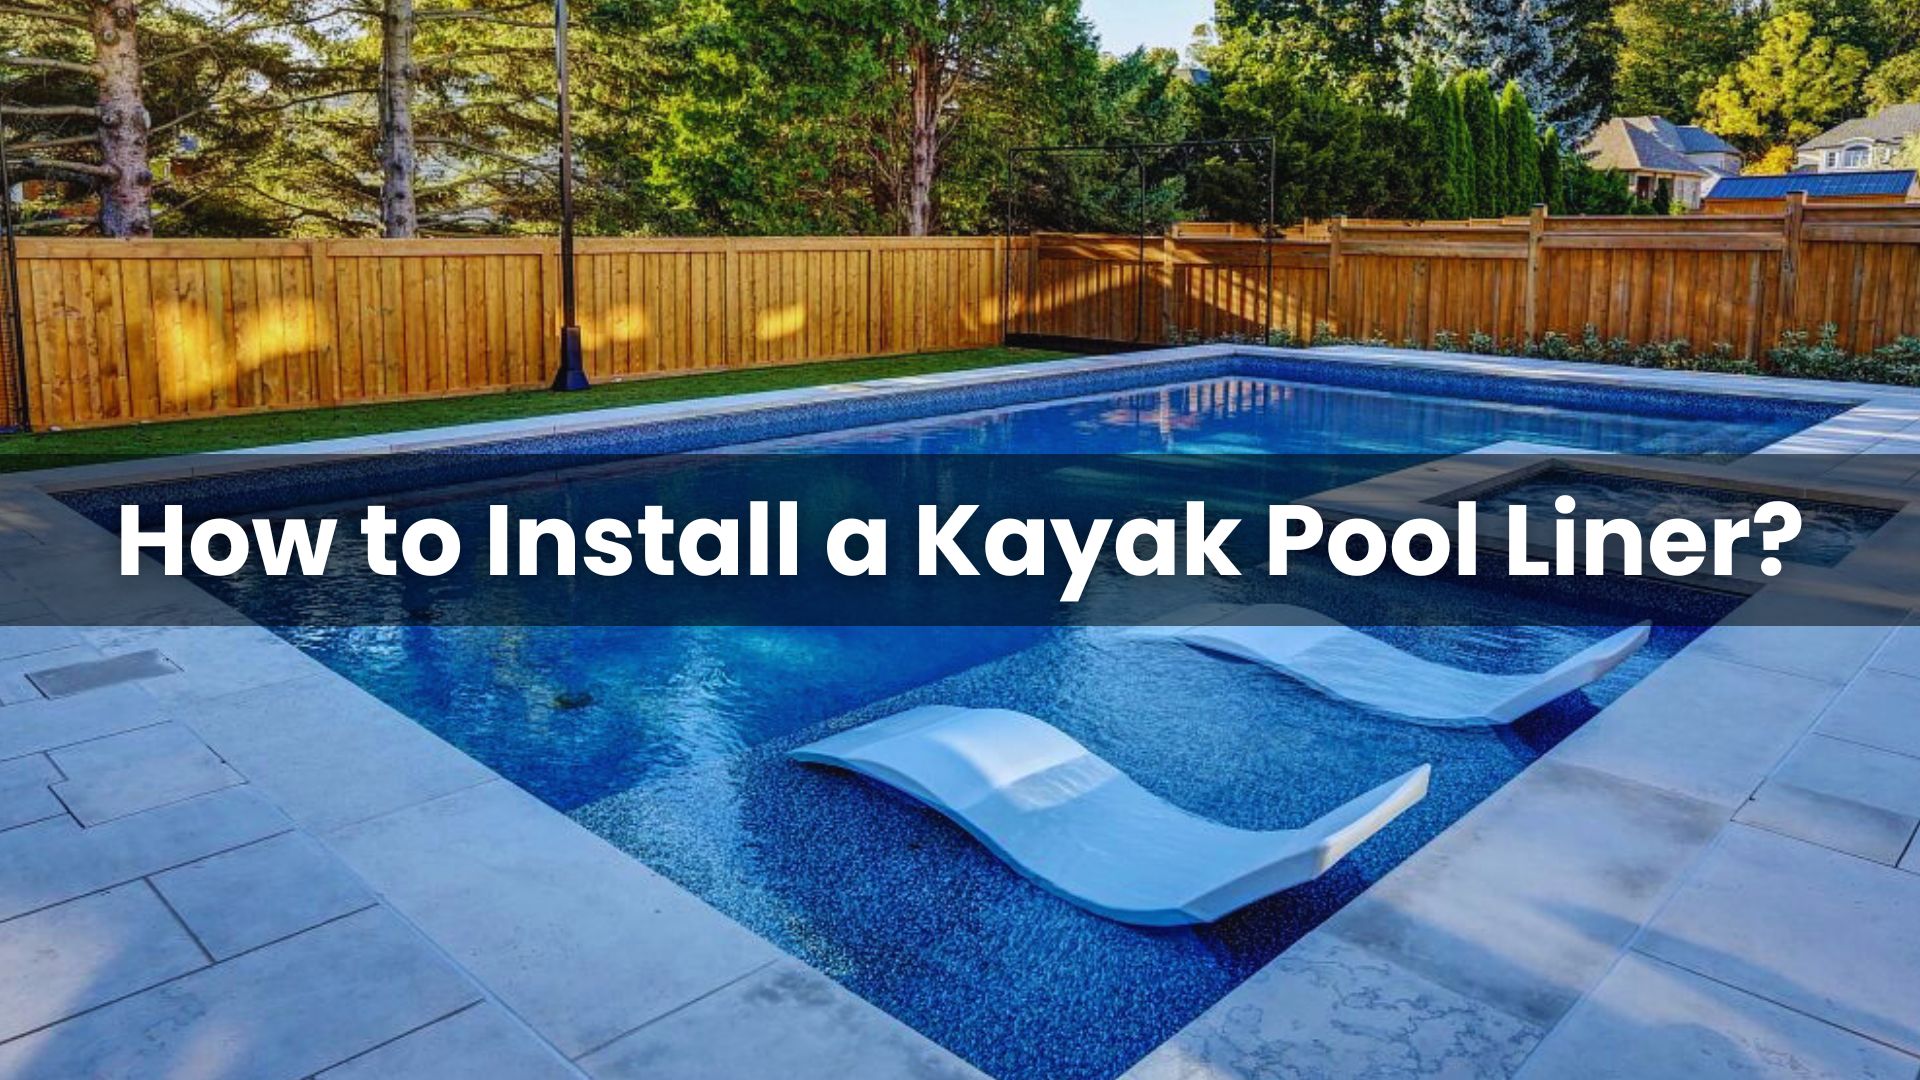 How to Install a Kayak Pool Liner